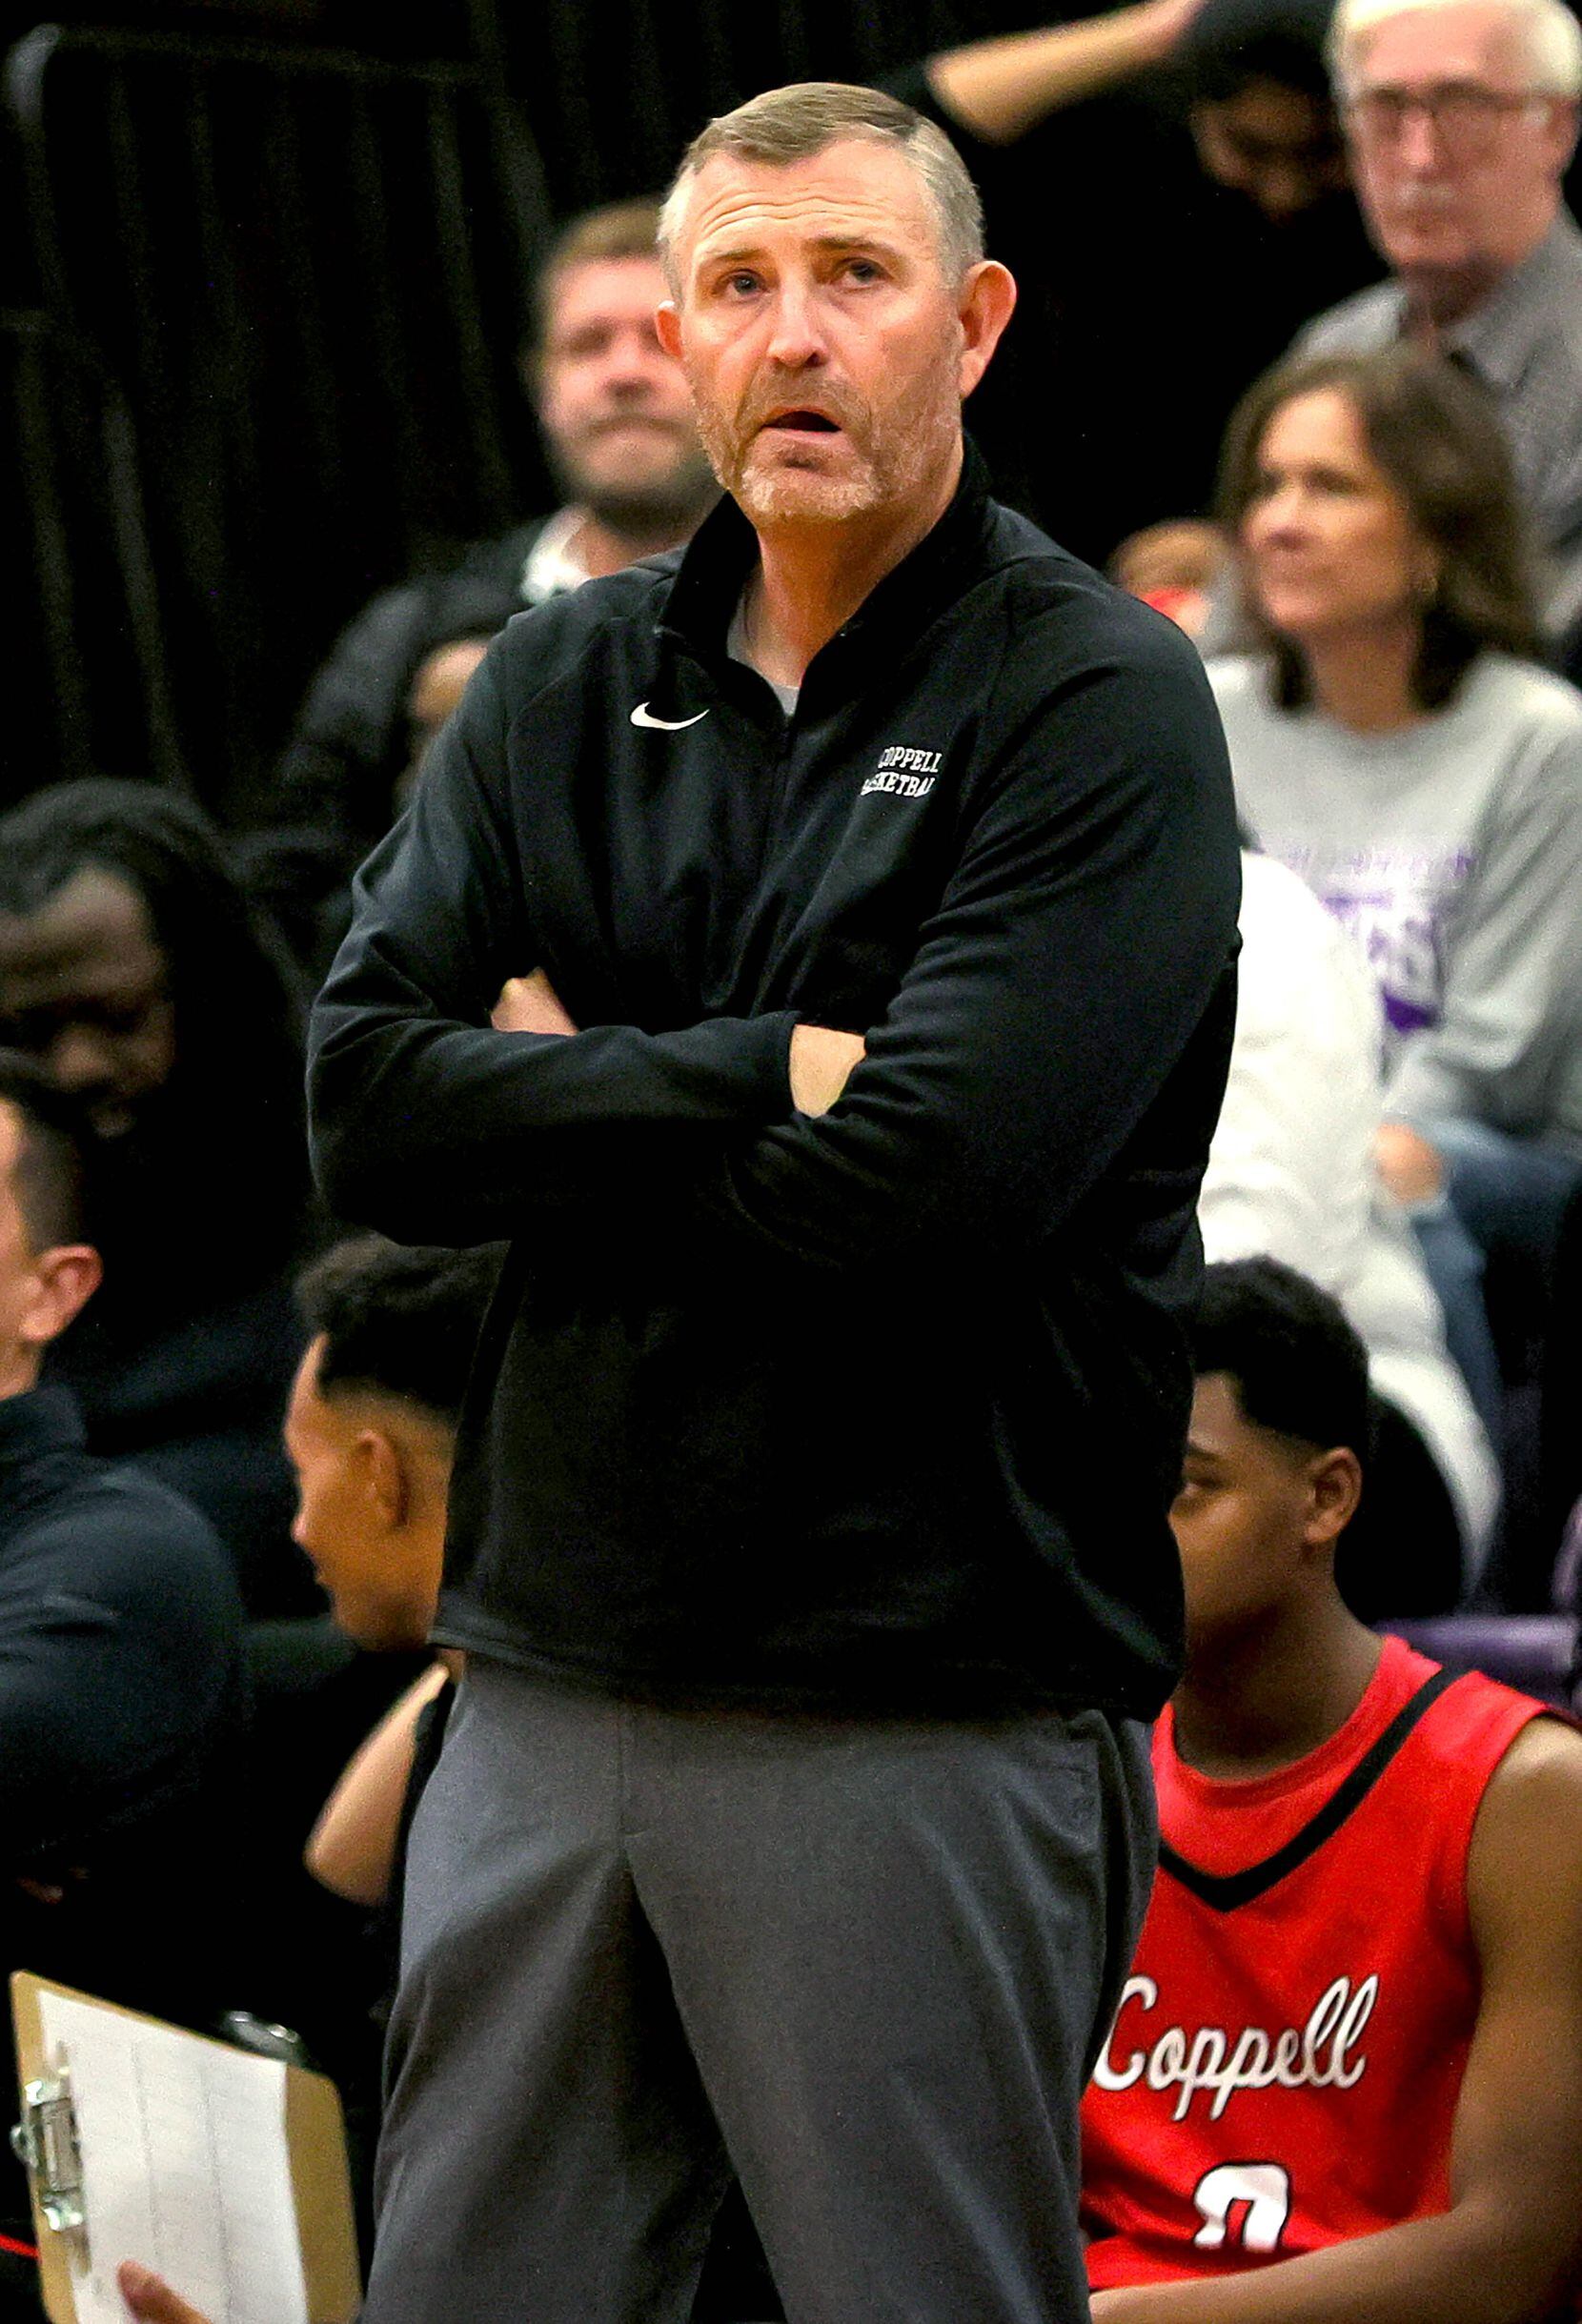 Coppell head coach Clint Schnell looks up at the scoreboard during the second half against Richardson in a 6A nondistrict boys high school basketball game played on December 7, 2021 at Richardson High School in Richardson.  (Steve Nurenberg/Special Contributor)